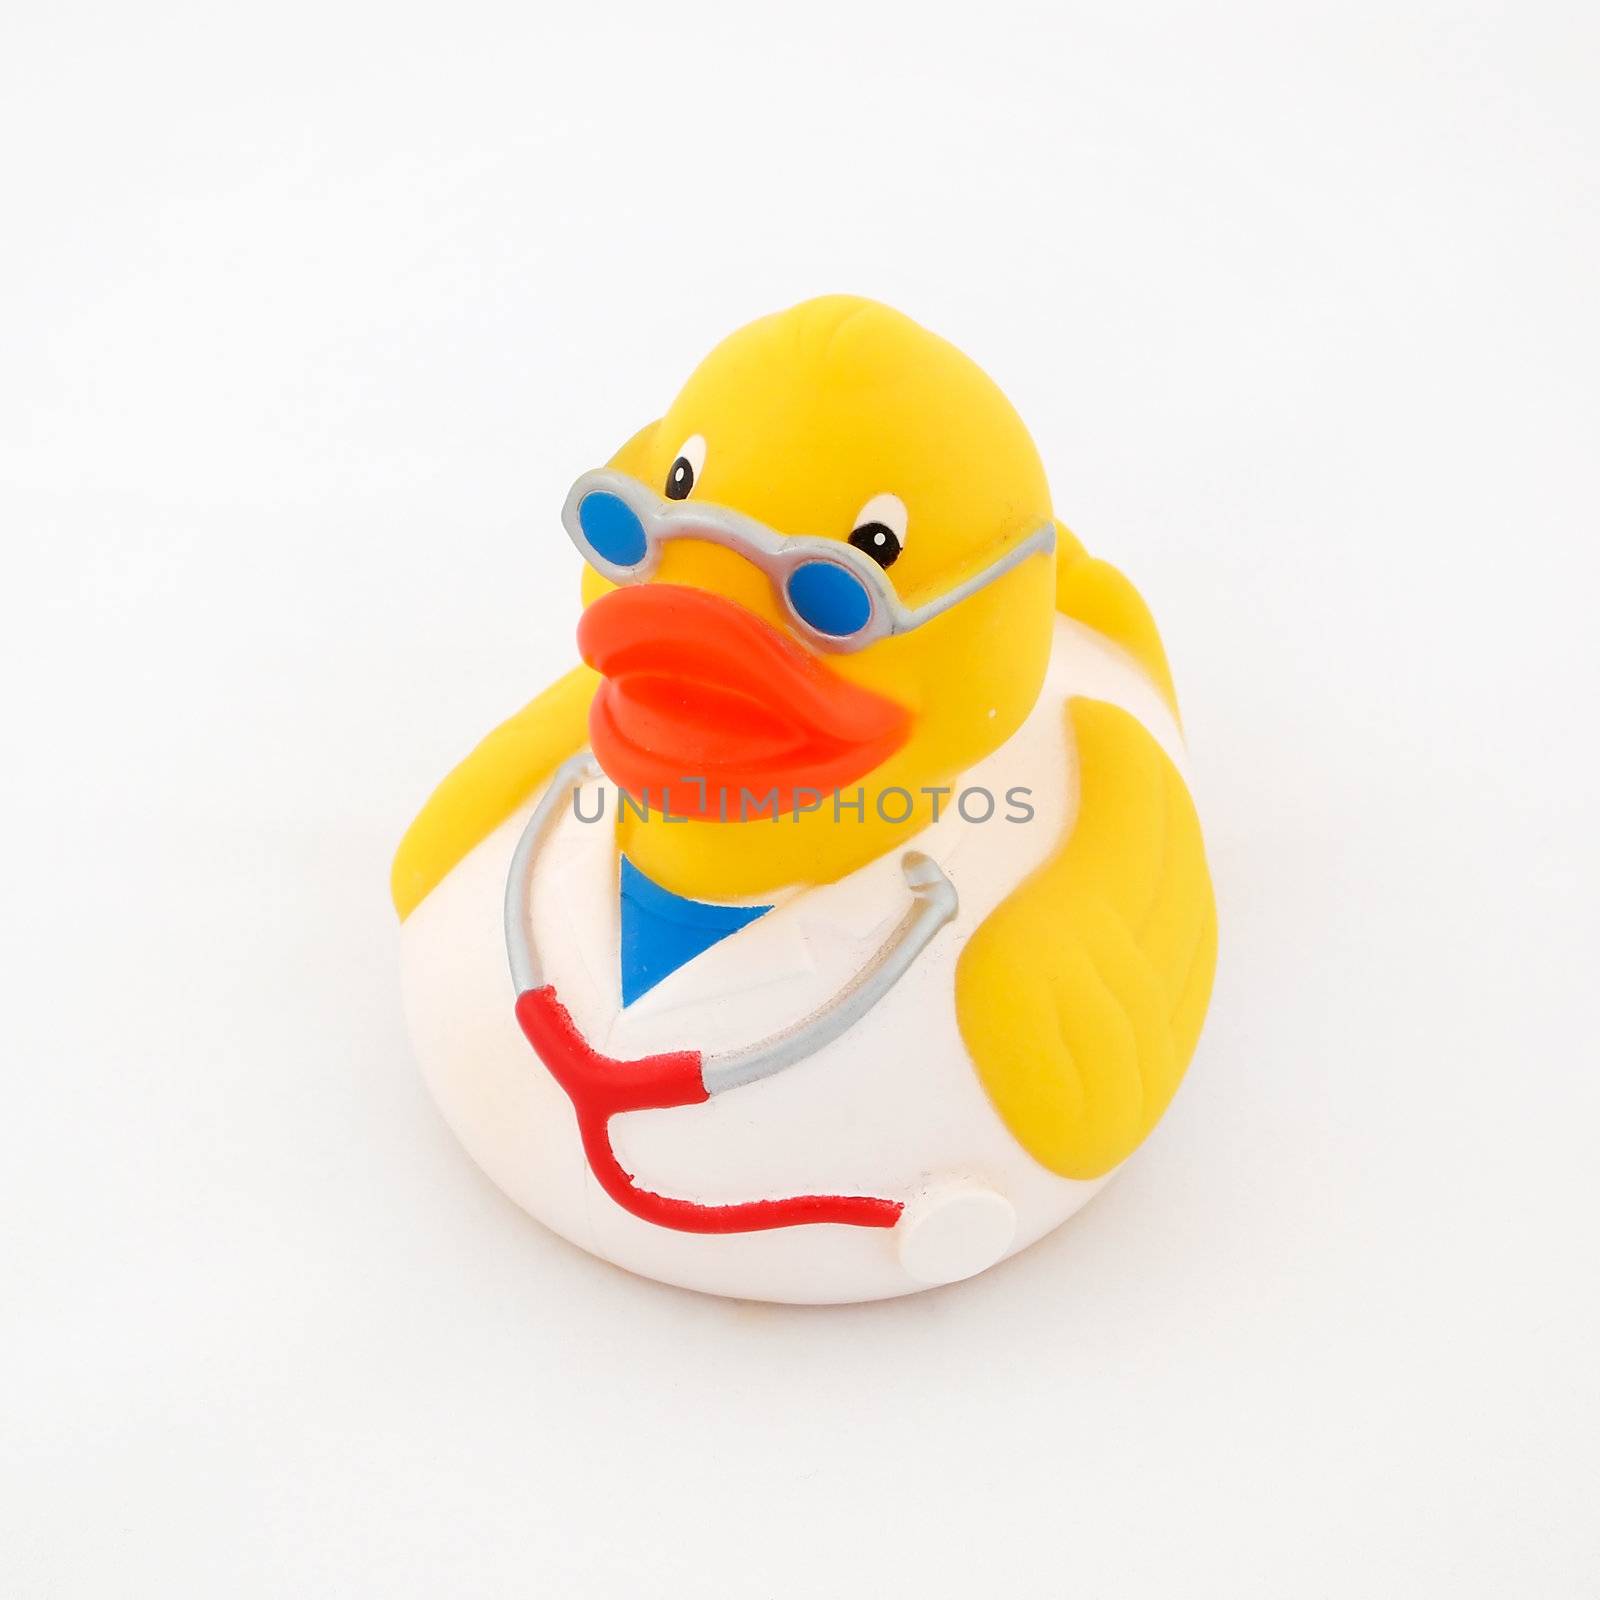 Rubber duck in doctor's clothes by pljvv